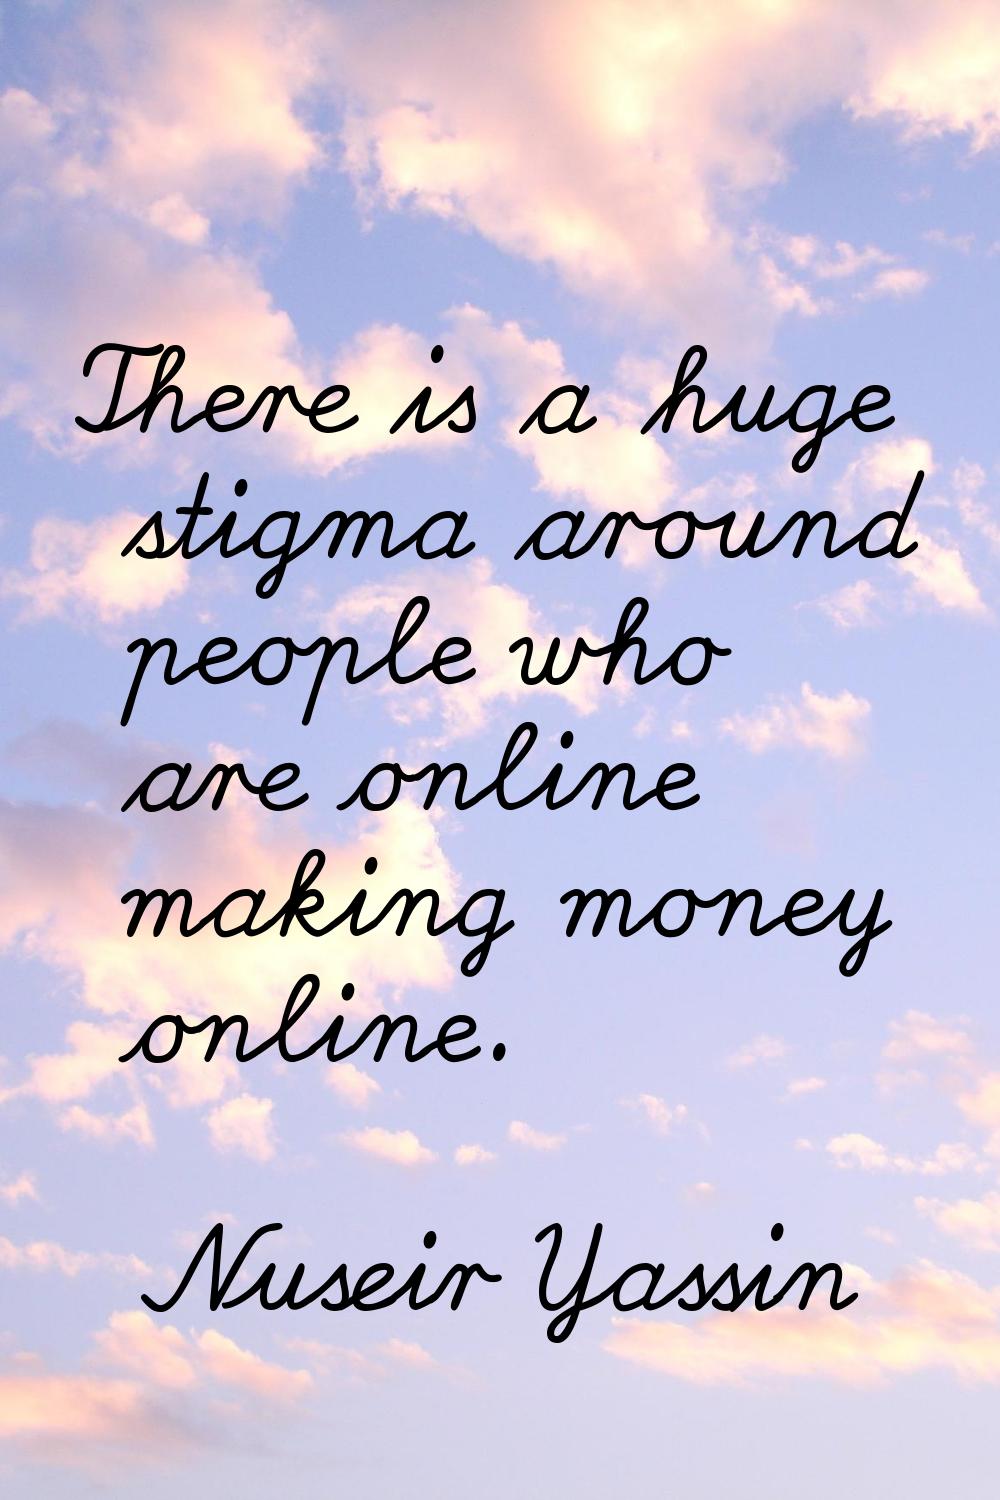 There is a huge stigma around people who are online making money online.